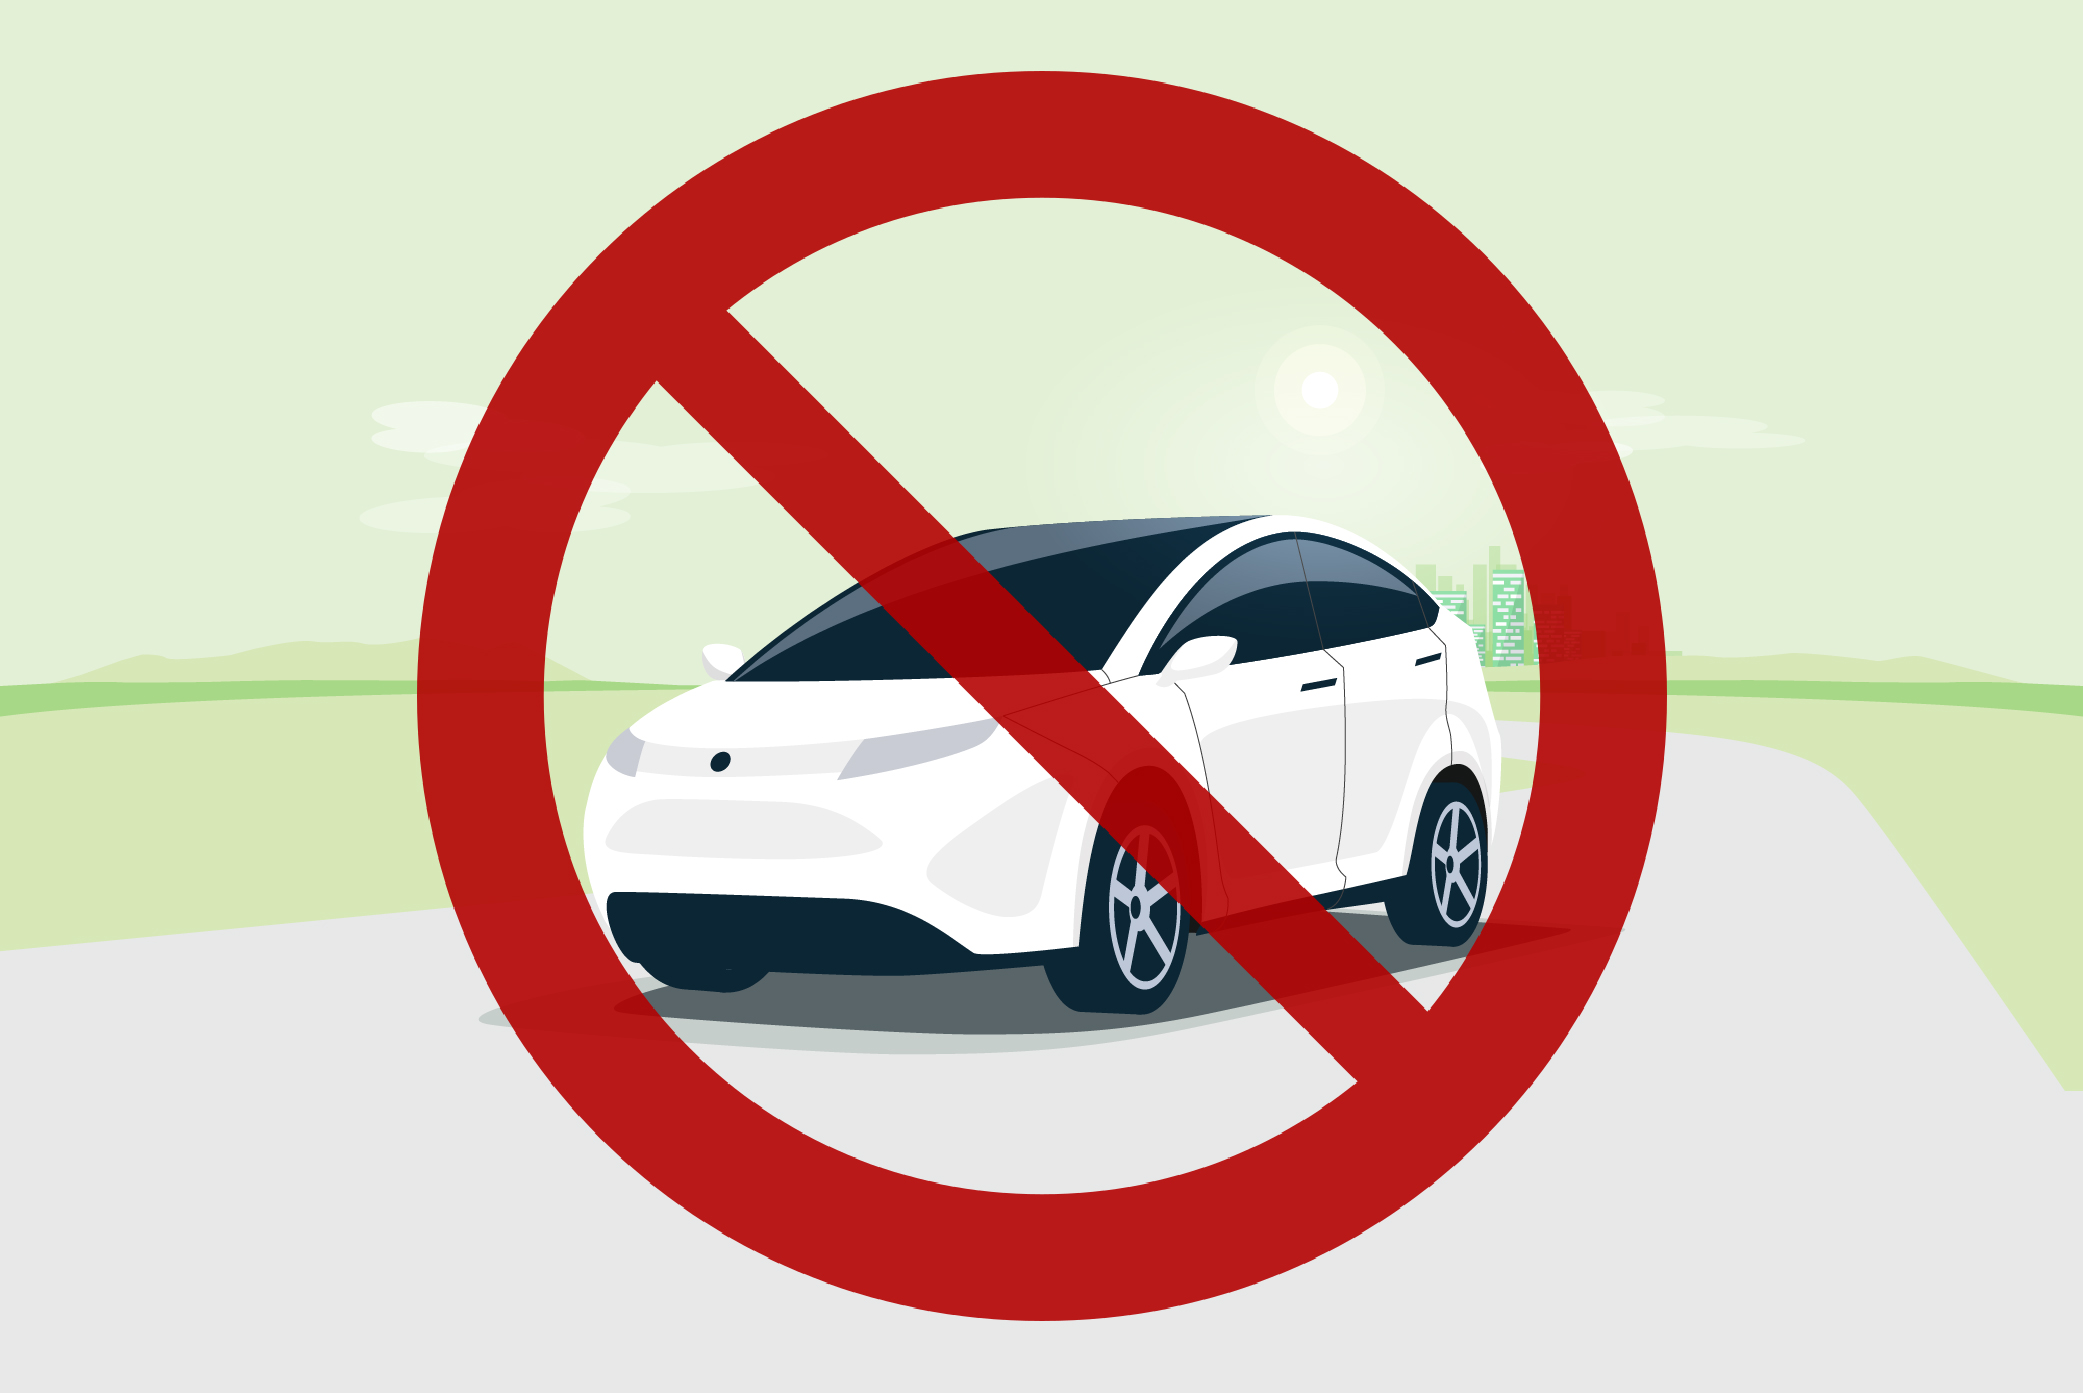 Illustration of a white car with a red no symbol over it